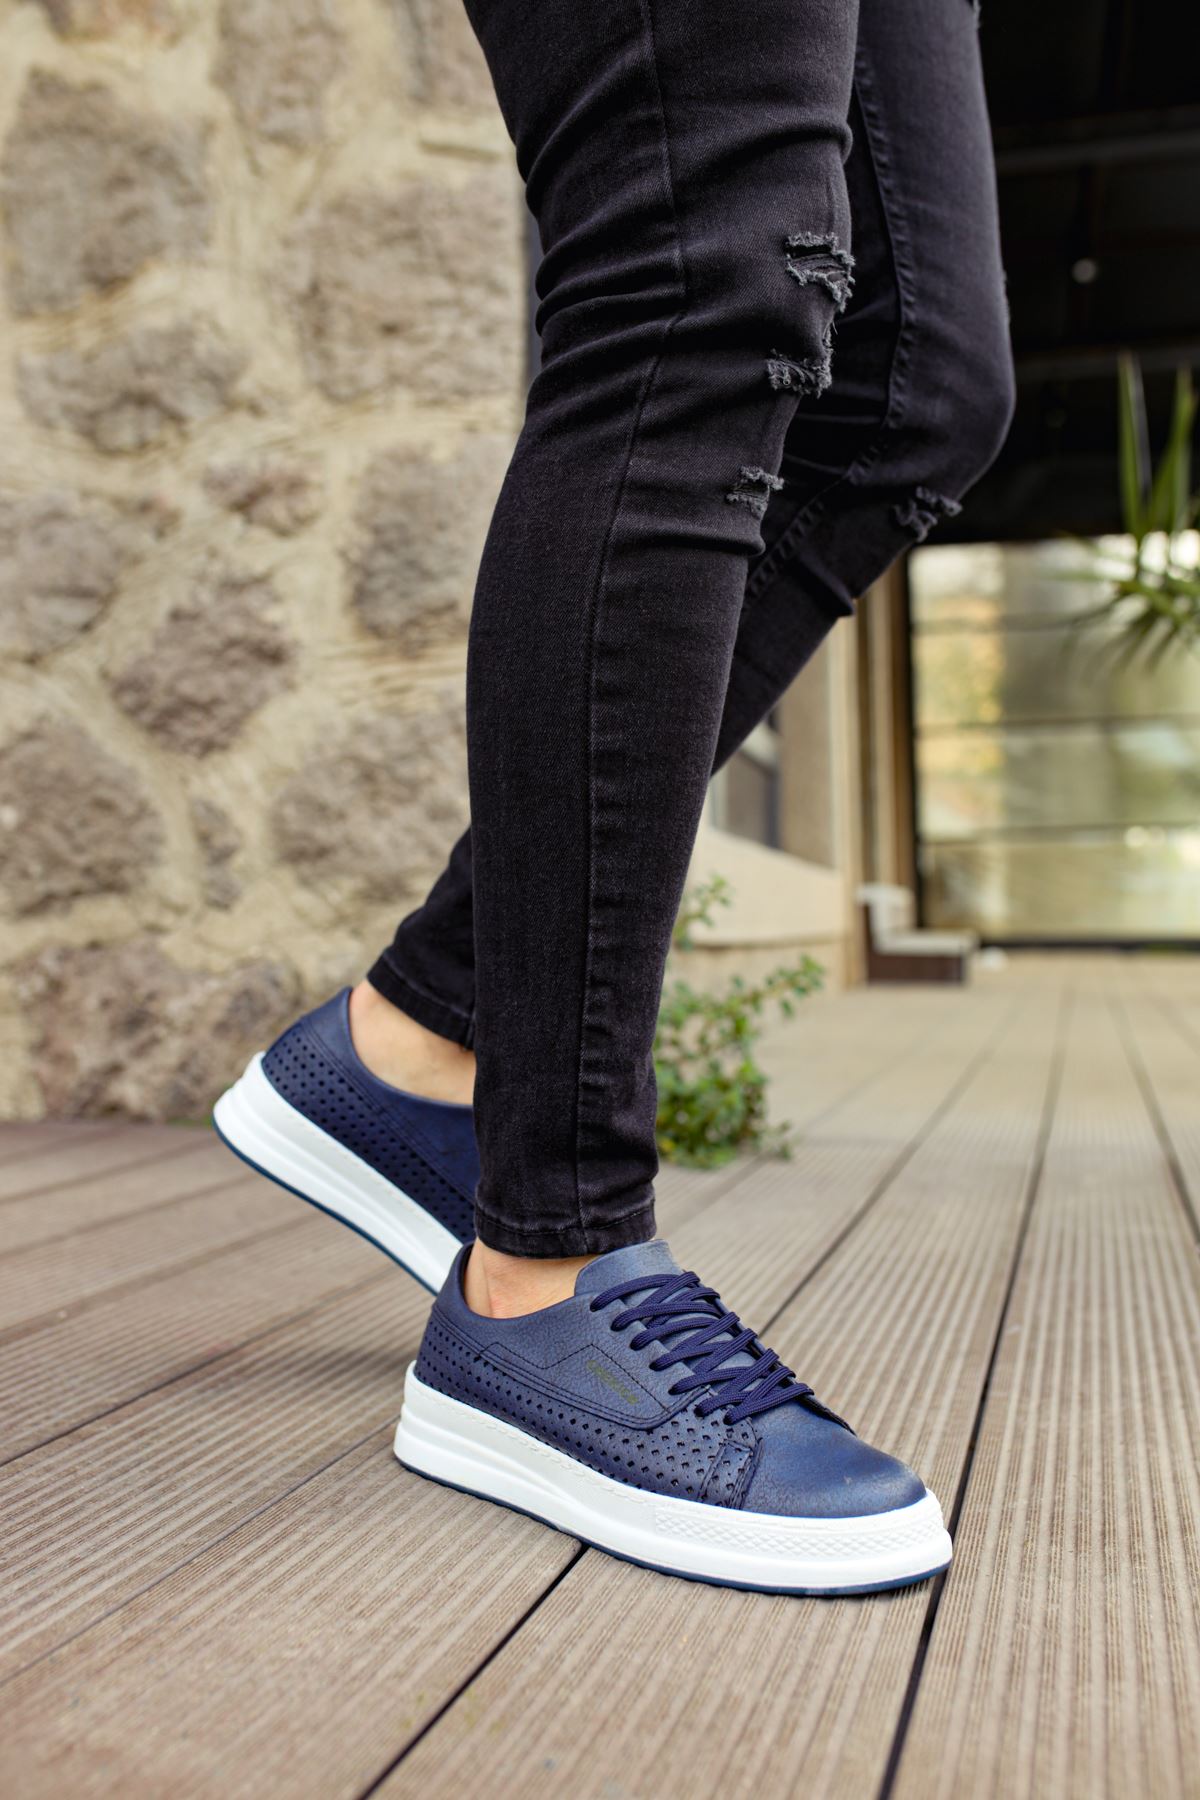 Chekich Men's Shoes Navy Blue Color Faux Leather Laces Summer 2021 Casual Vulcanized Sneakers Breathable Odorless Orthopedic Hot Sale New Brand Air Flat Wedding Walking Suits Comfortable Oxford Flexible CH043 V3